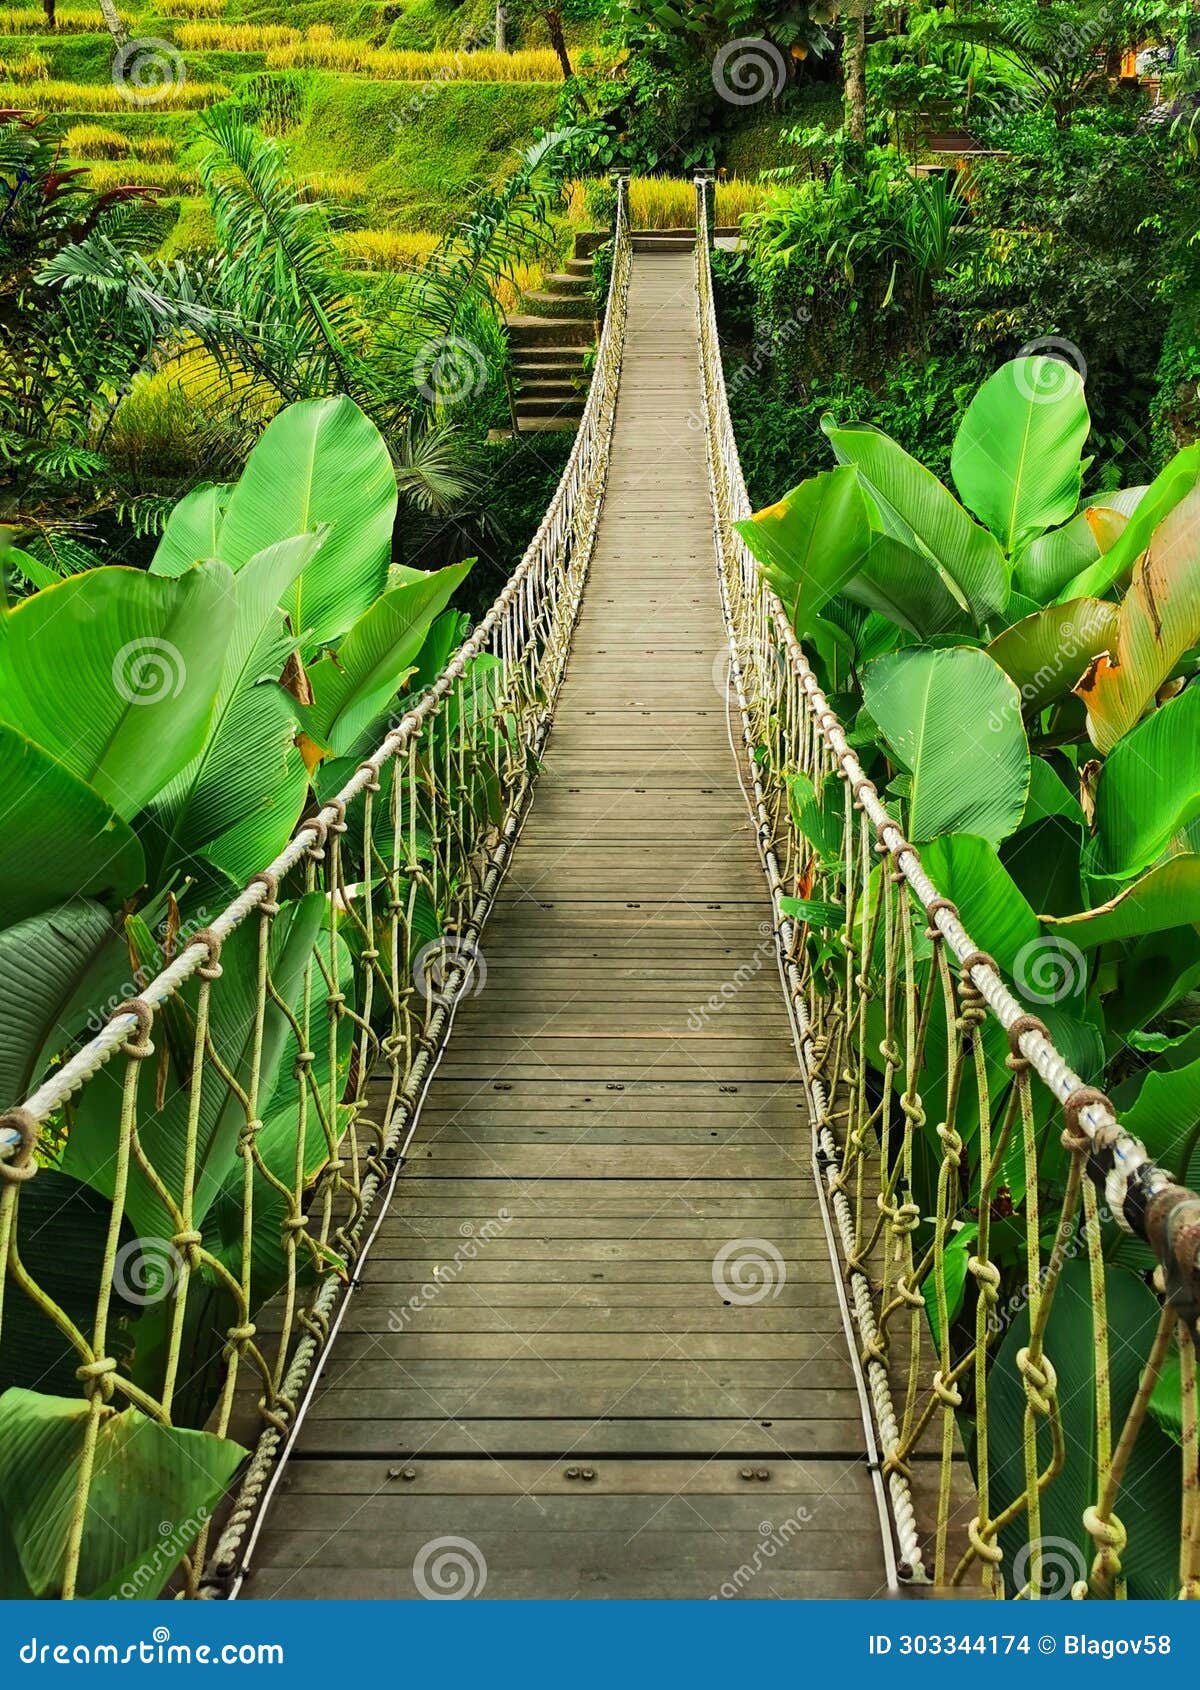 wooden suspended bridge at the alas harum entertainment centre on the bali island in indonesia